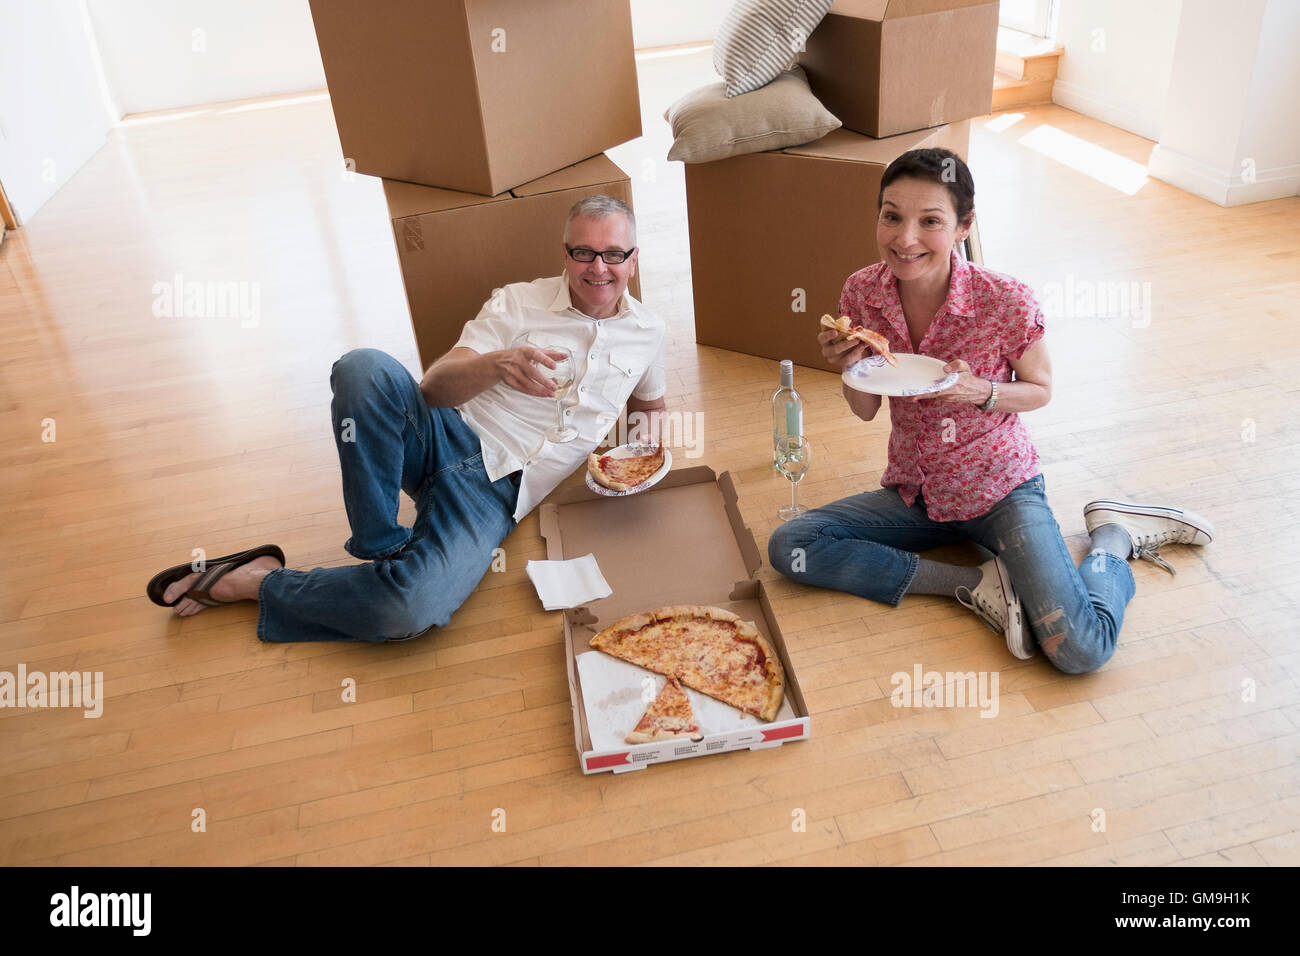 Couple eating pizza in new apartment Stock Photo